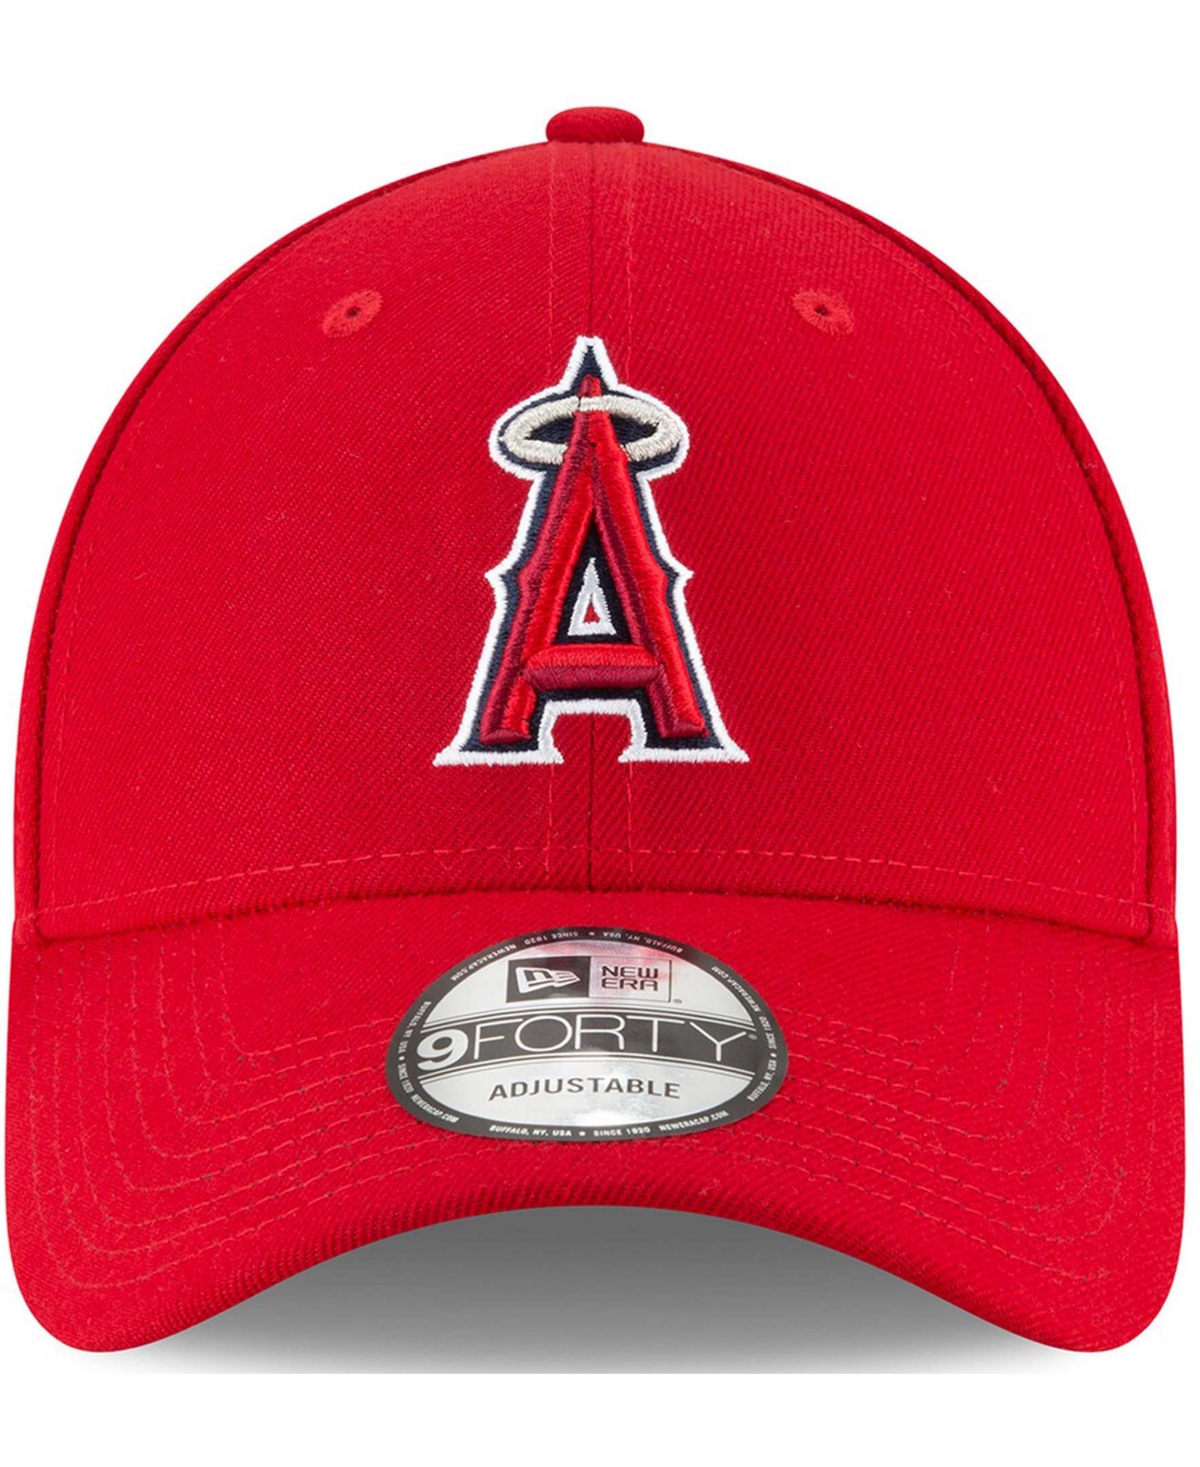 Shop New Era Big Boys And Girls Red Los Angeles Angels Game The League 9forty Adjustable Hat